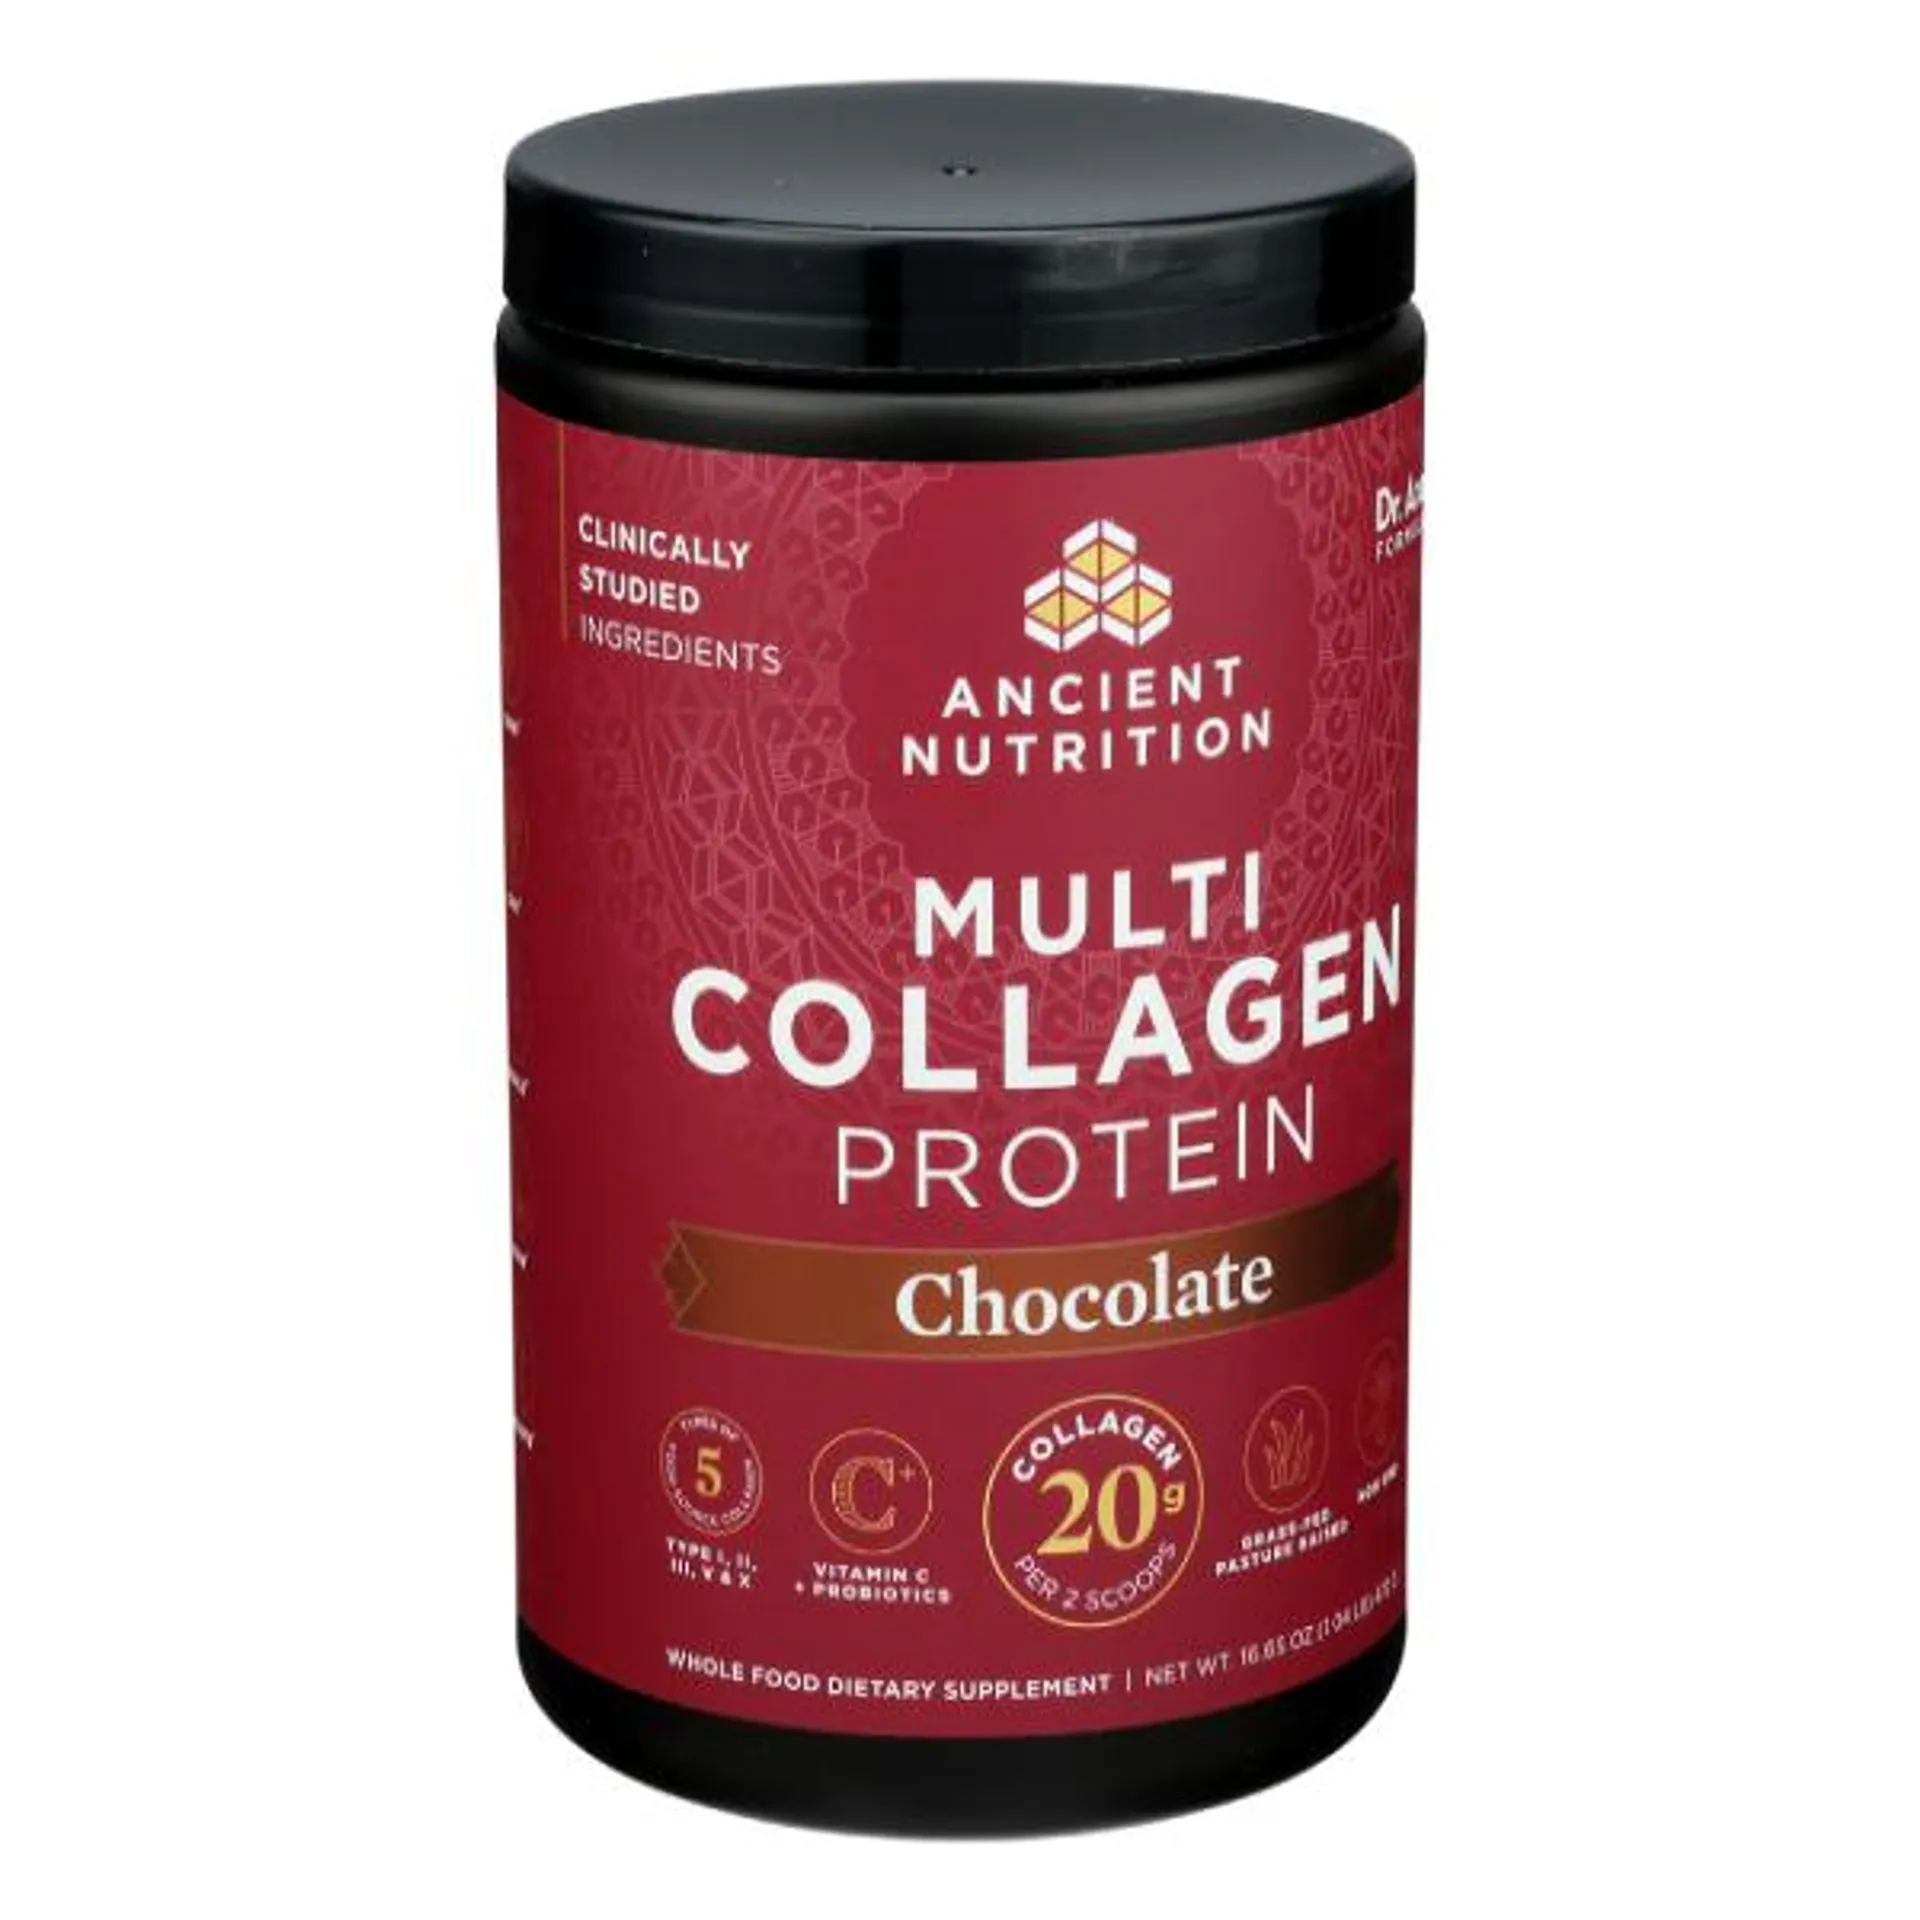 Ancient Nutrition Multi Collagen Protein Chocolate Flavor - 18.5 Ounce